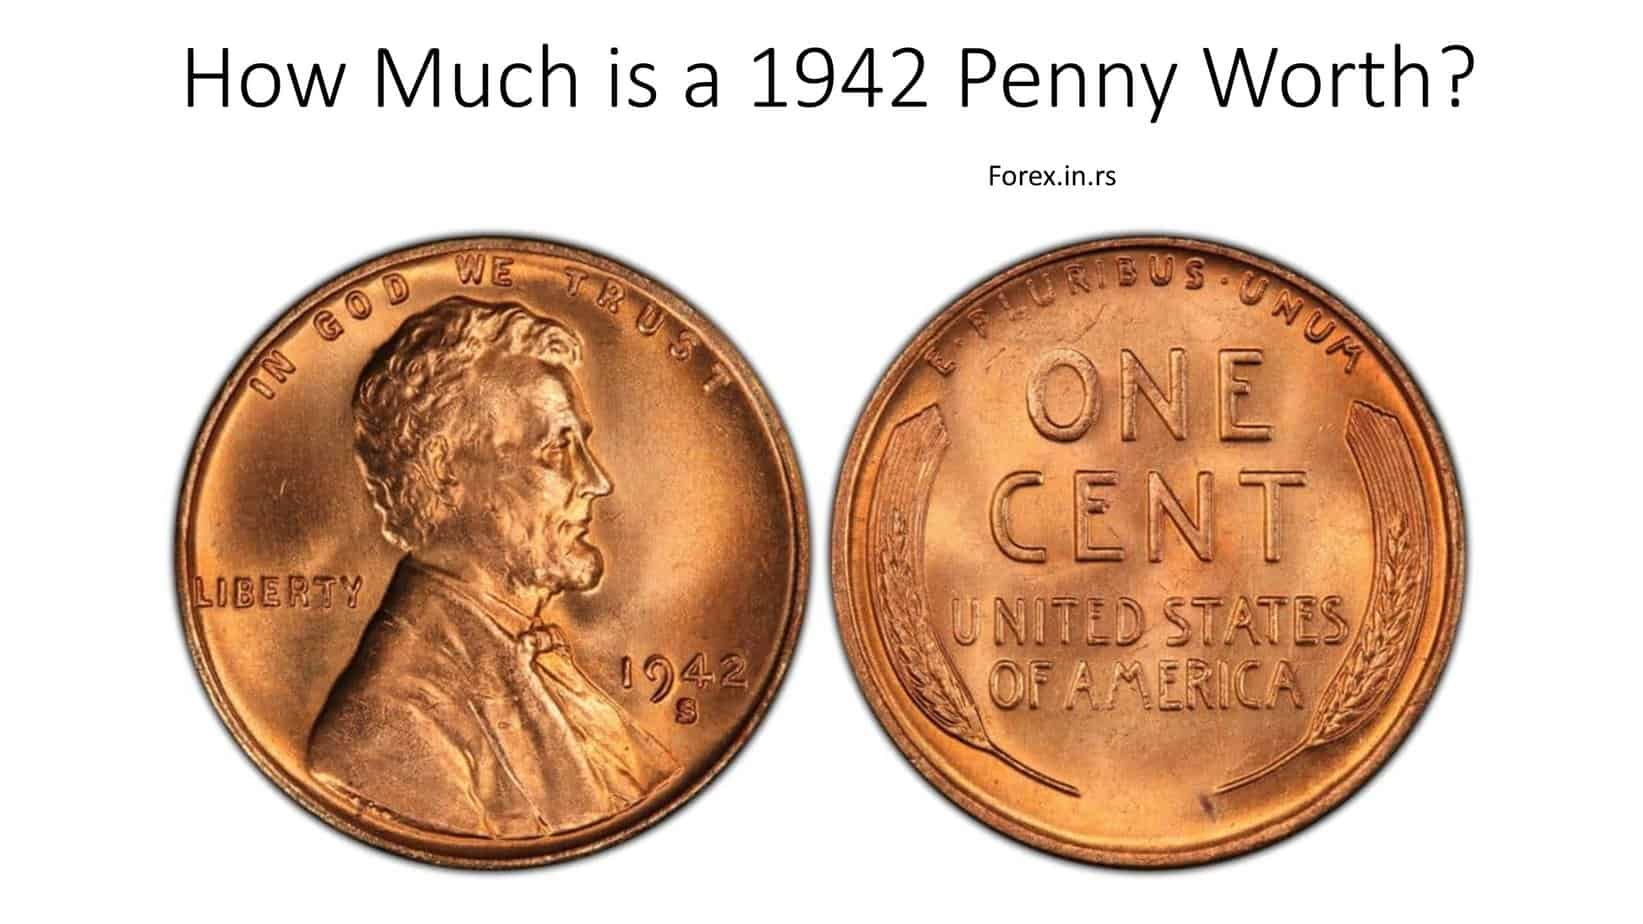 How Much is a 1942 Penny Worth